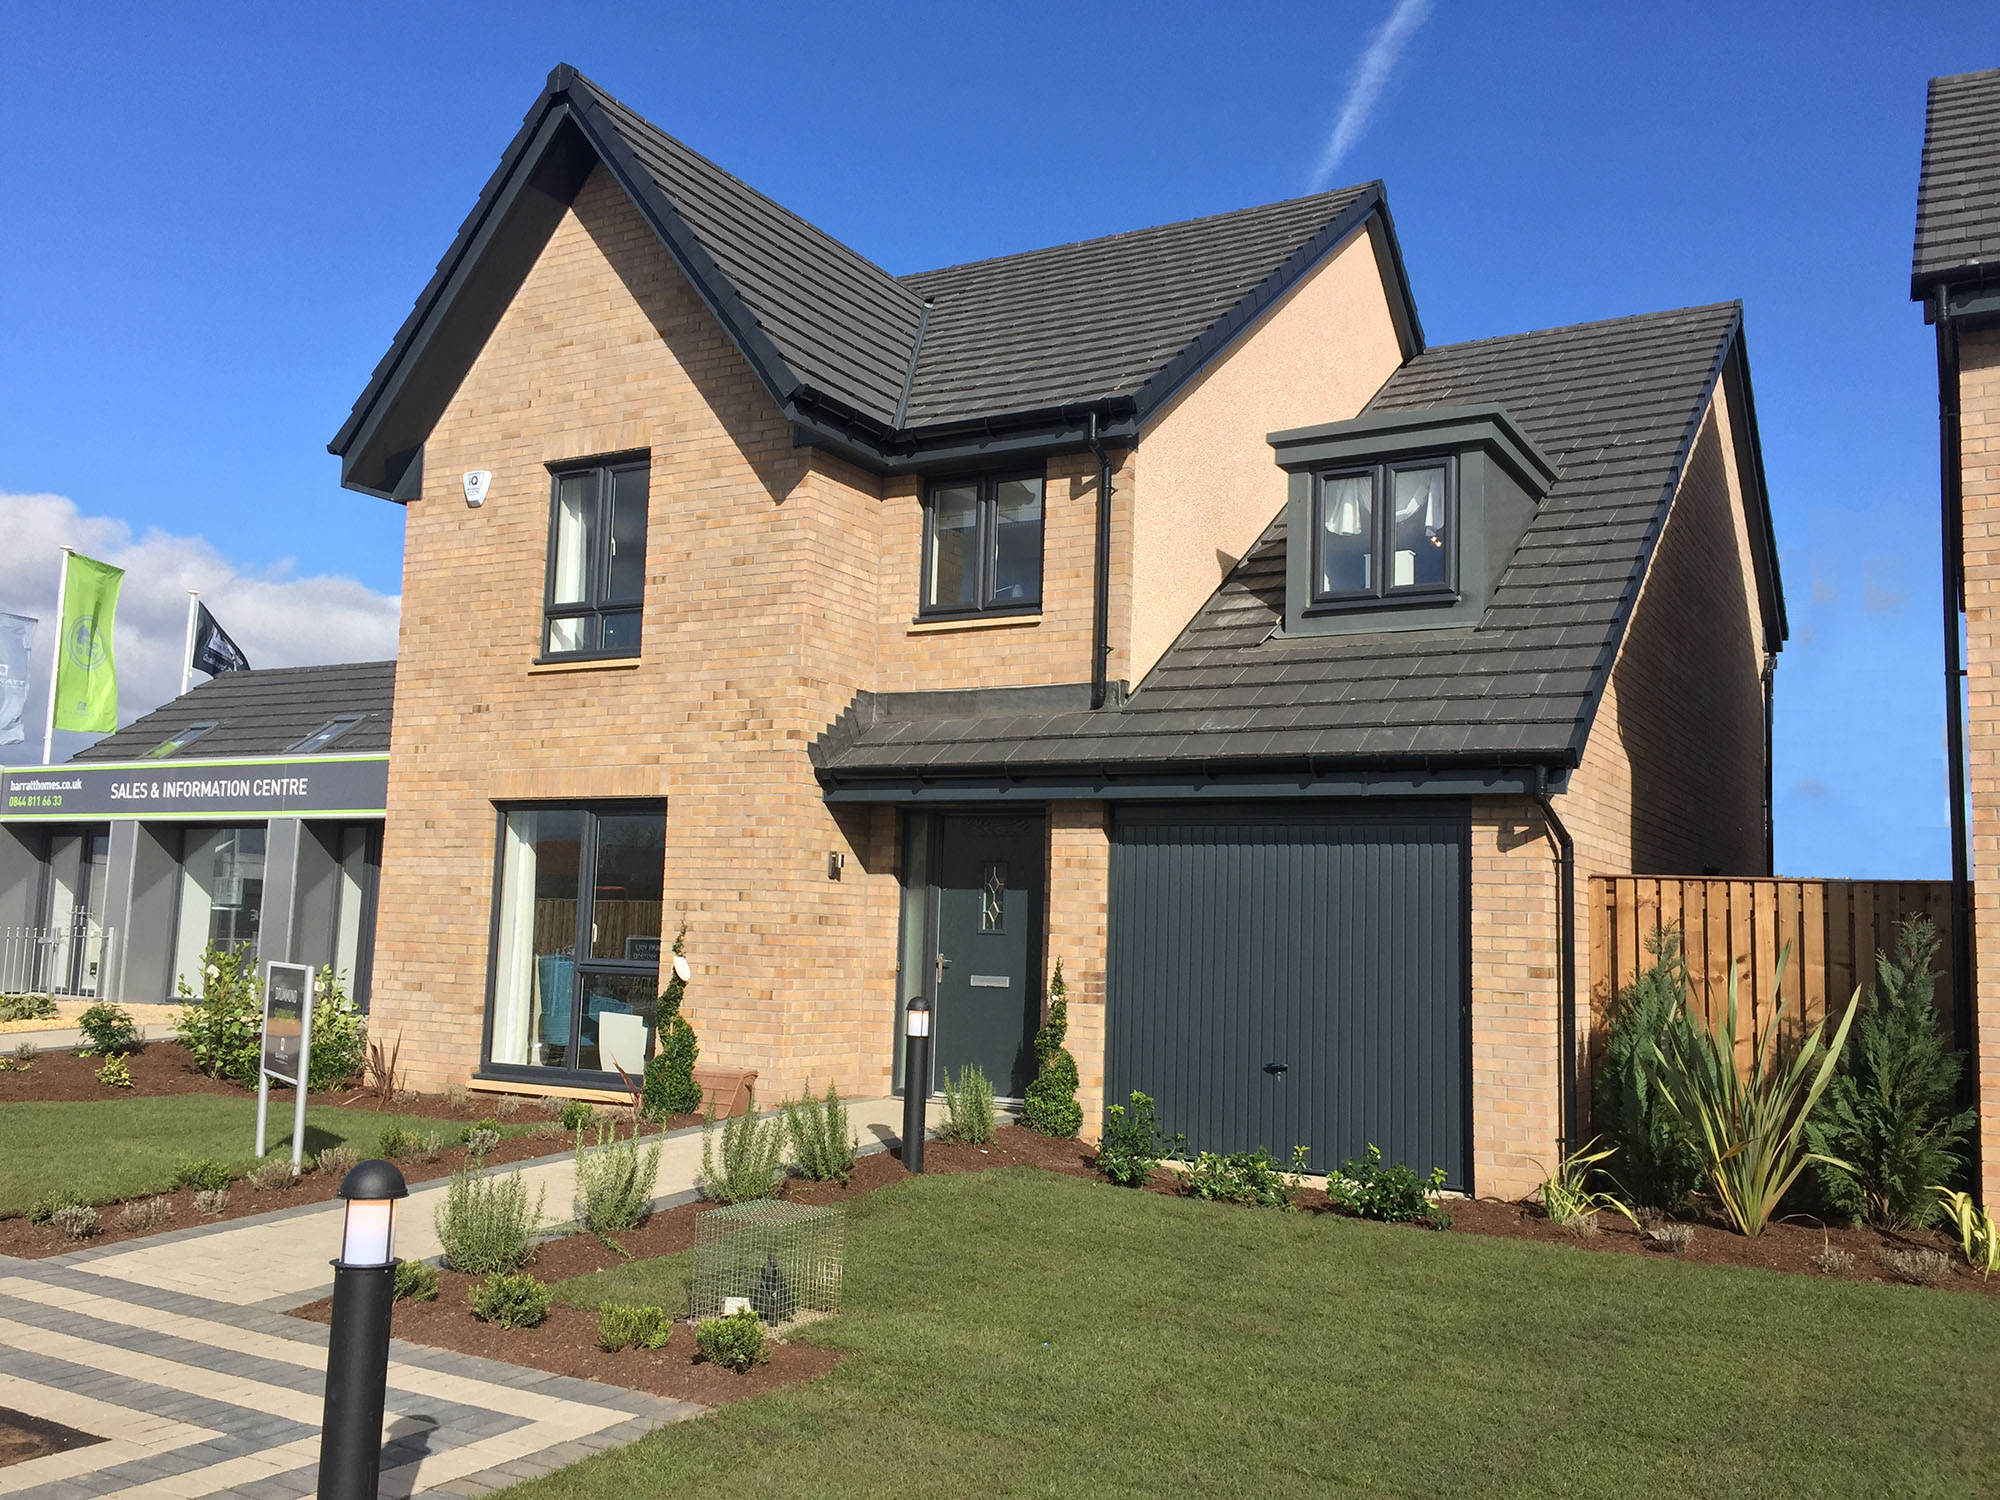 Spring is in the air at Barratt Homes Project Scotland